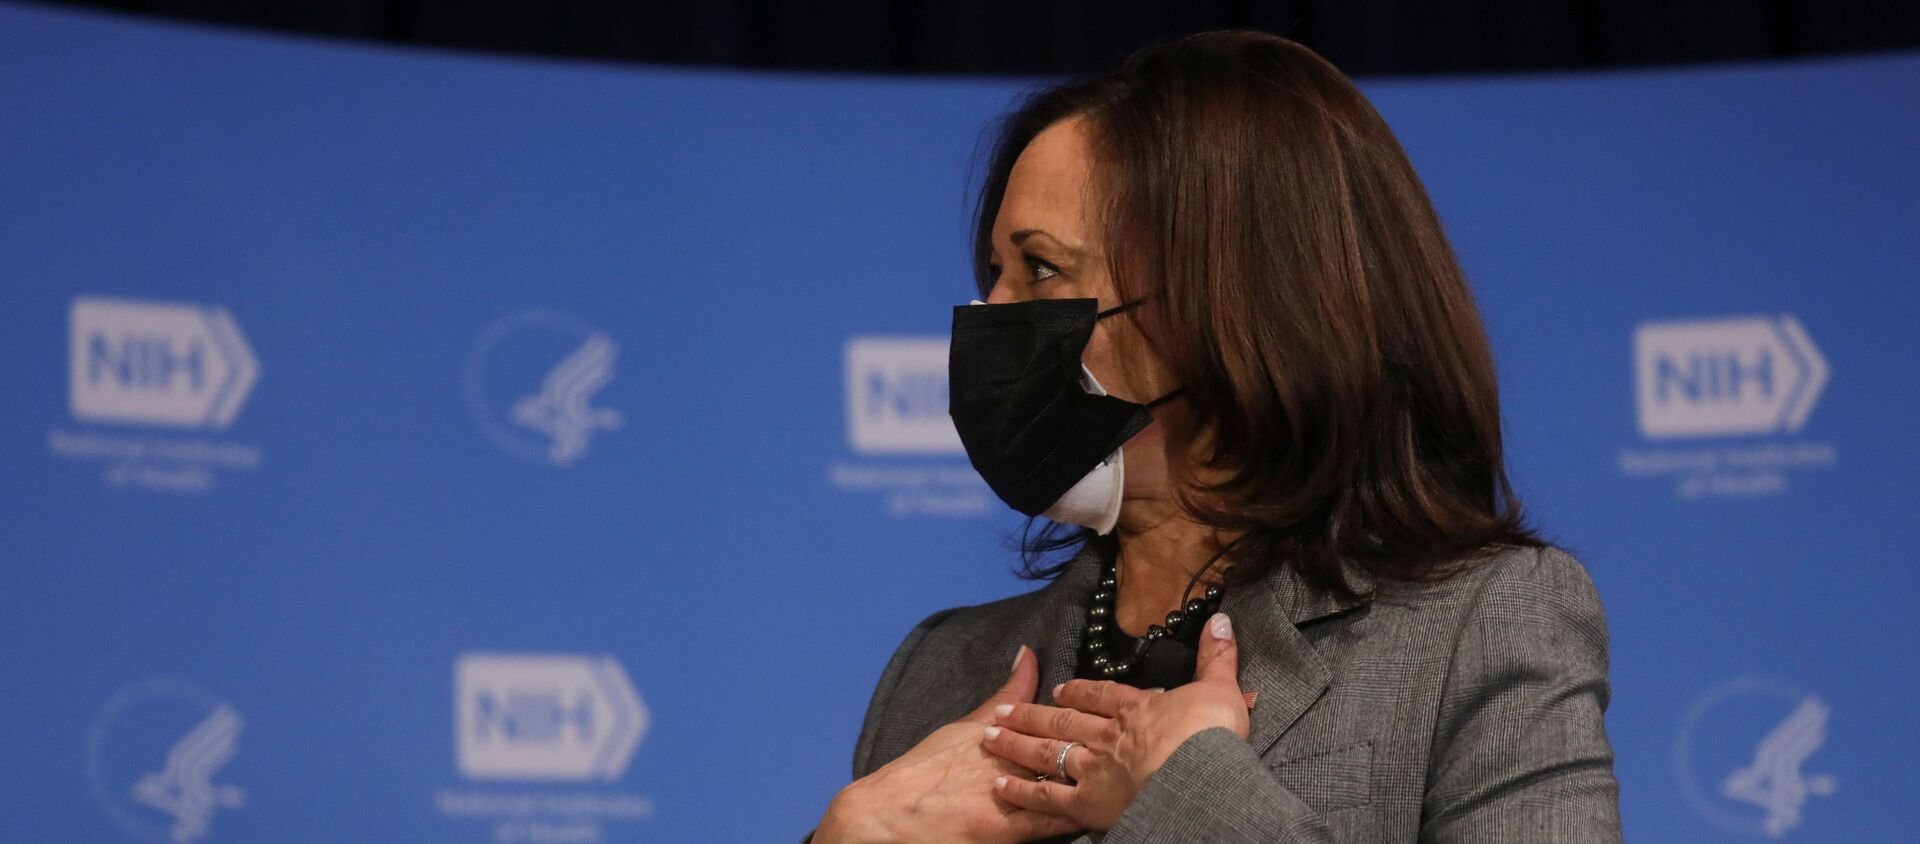 U.S. Vice President Kamala Harris reacts after receiving her second dose of the Moderna coronavirus disease (COVID-19) vaccine at the National Institutes of Health in Bethesda, Maryland, U.S. January 26, 2021. REUTERS/Leah Millis - Sputnik International, 1920, 03.02.2021